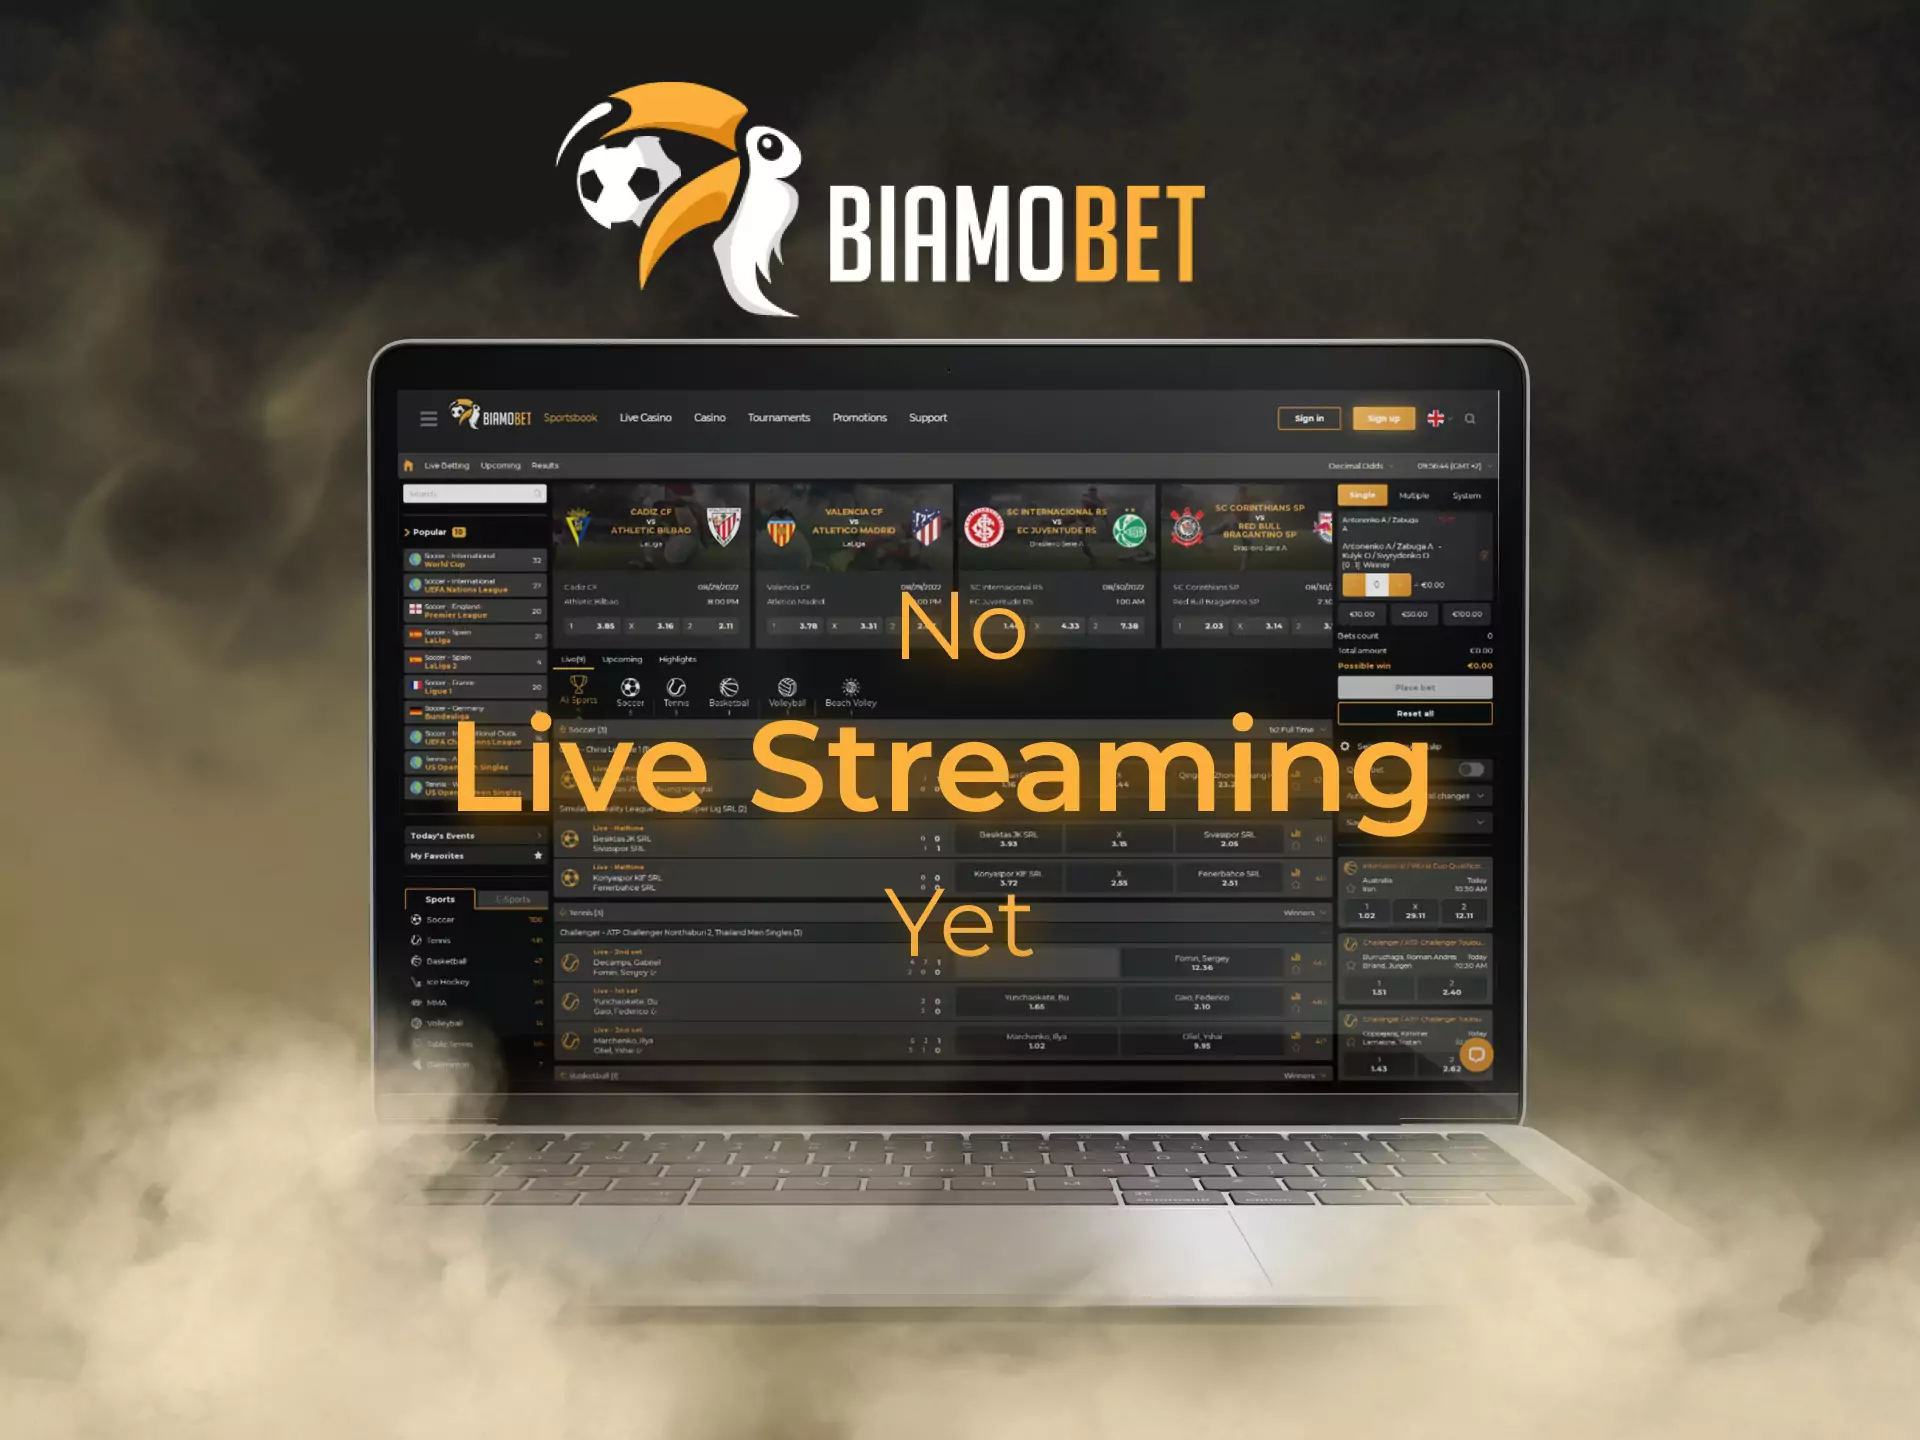 Unfortunately, you can't watch online streams on the Biamobet website.